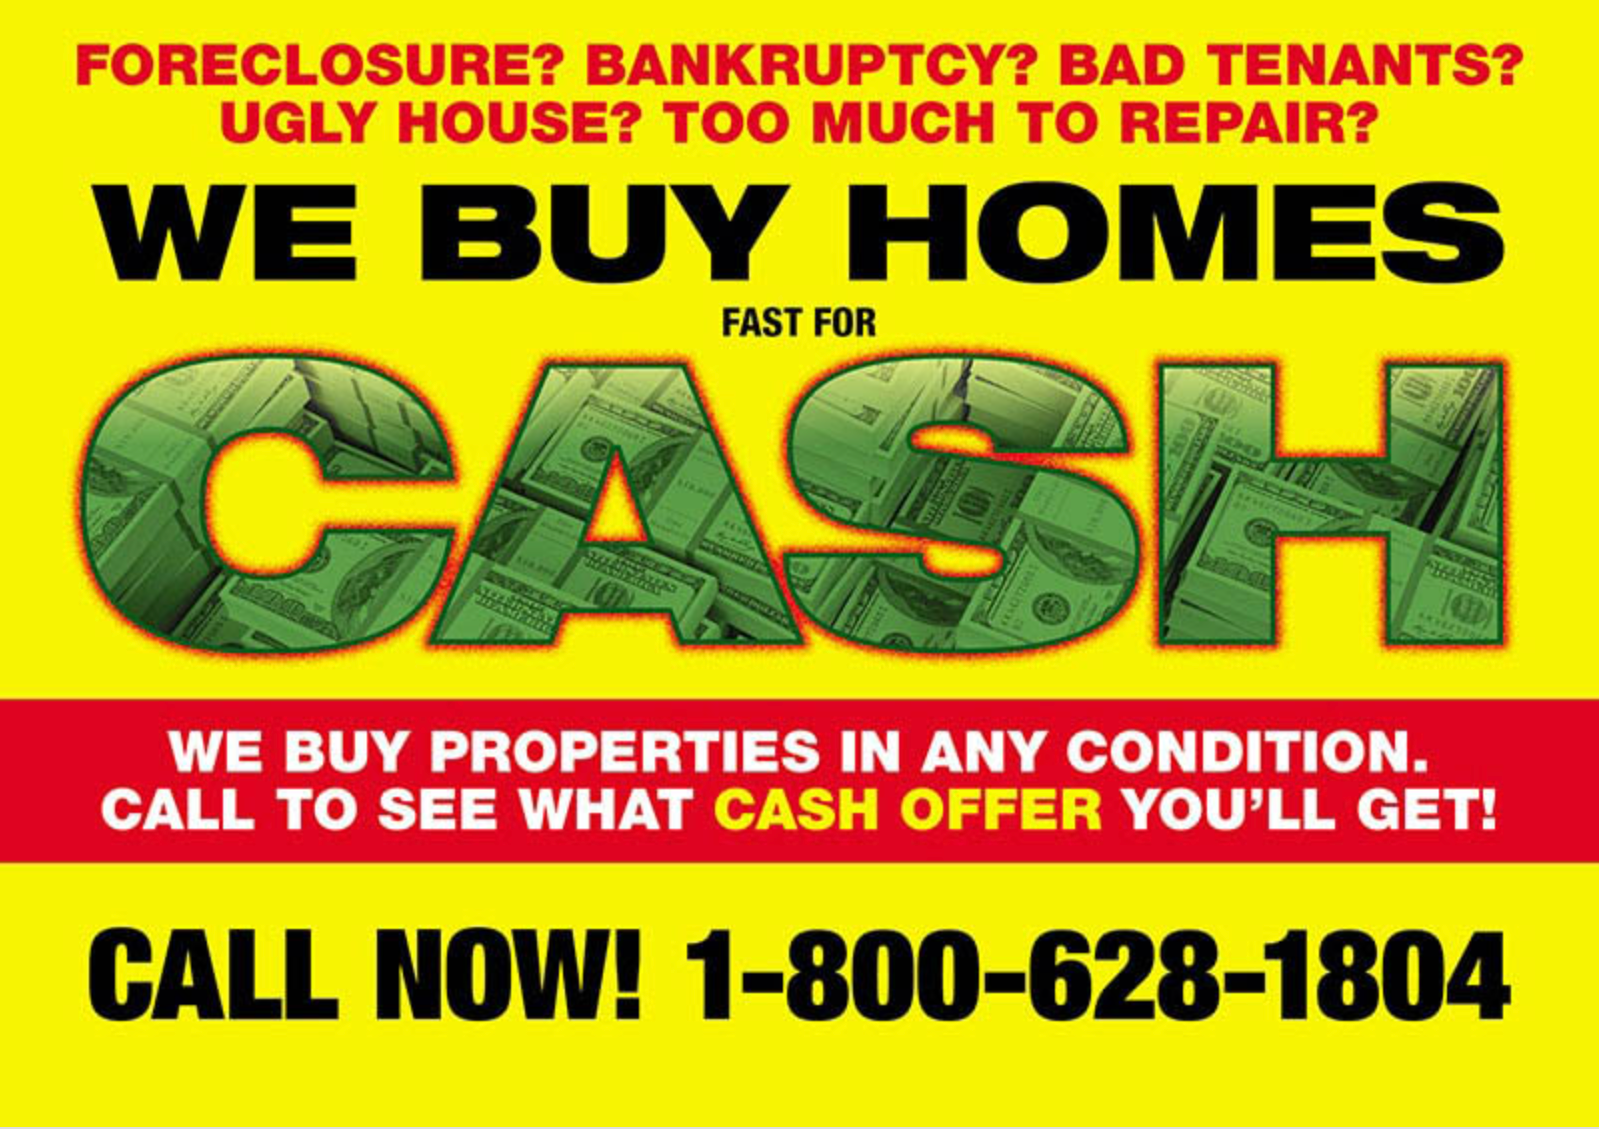 Cash offer for distressed property